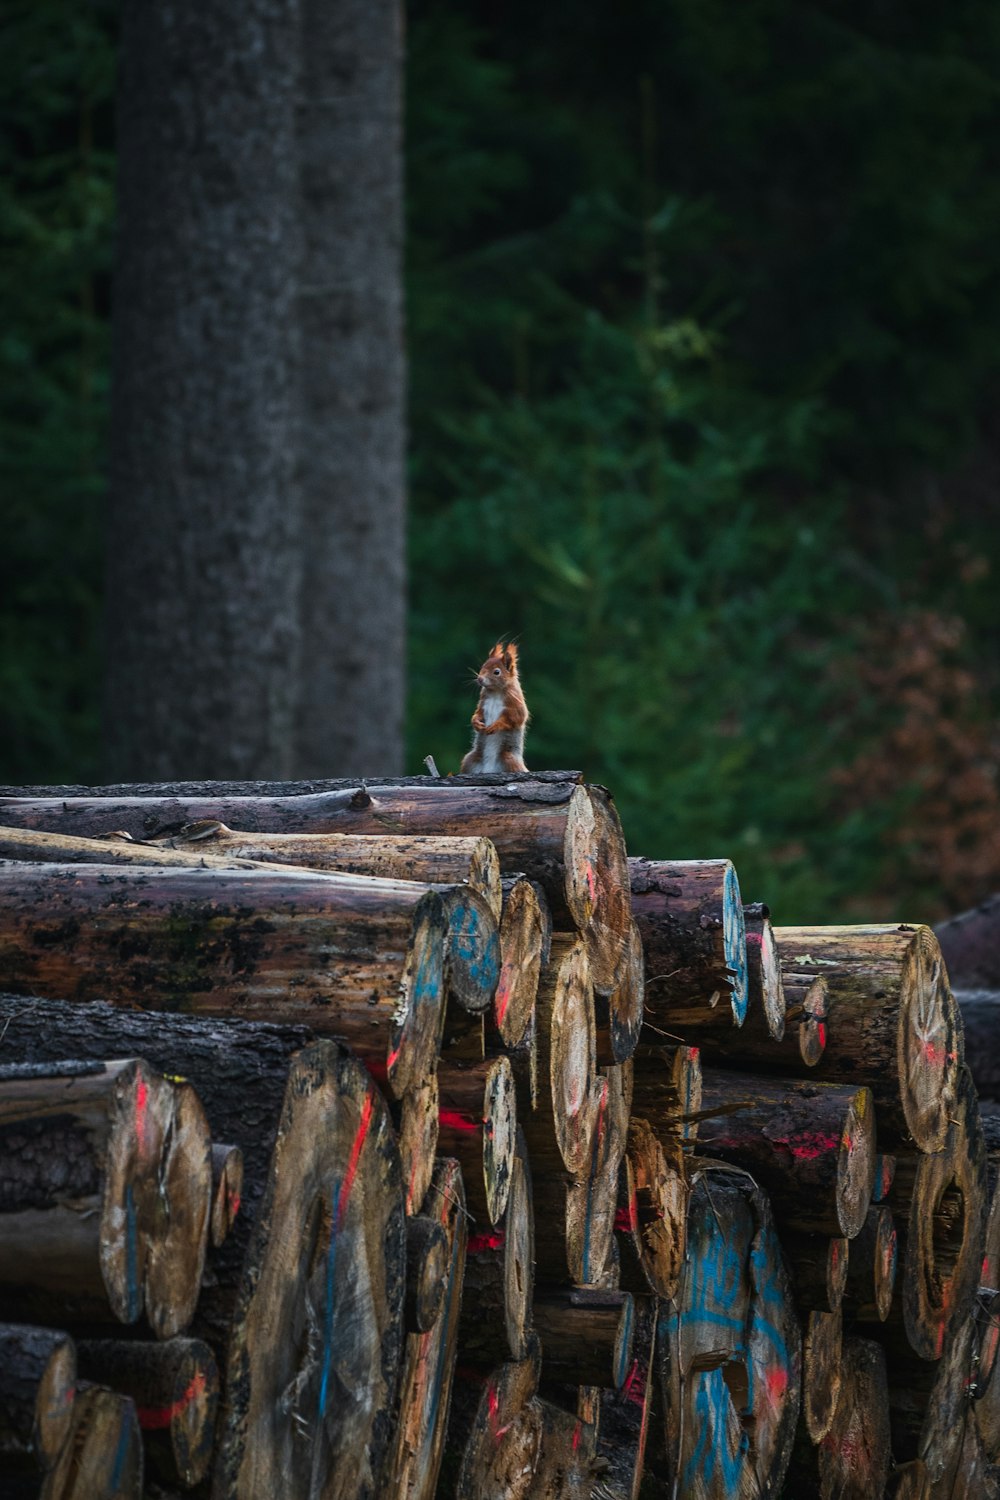 brown and white short coated dog on brown wooden log